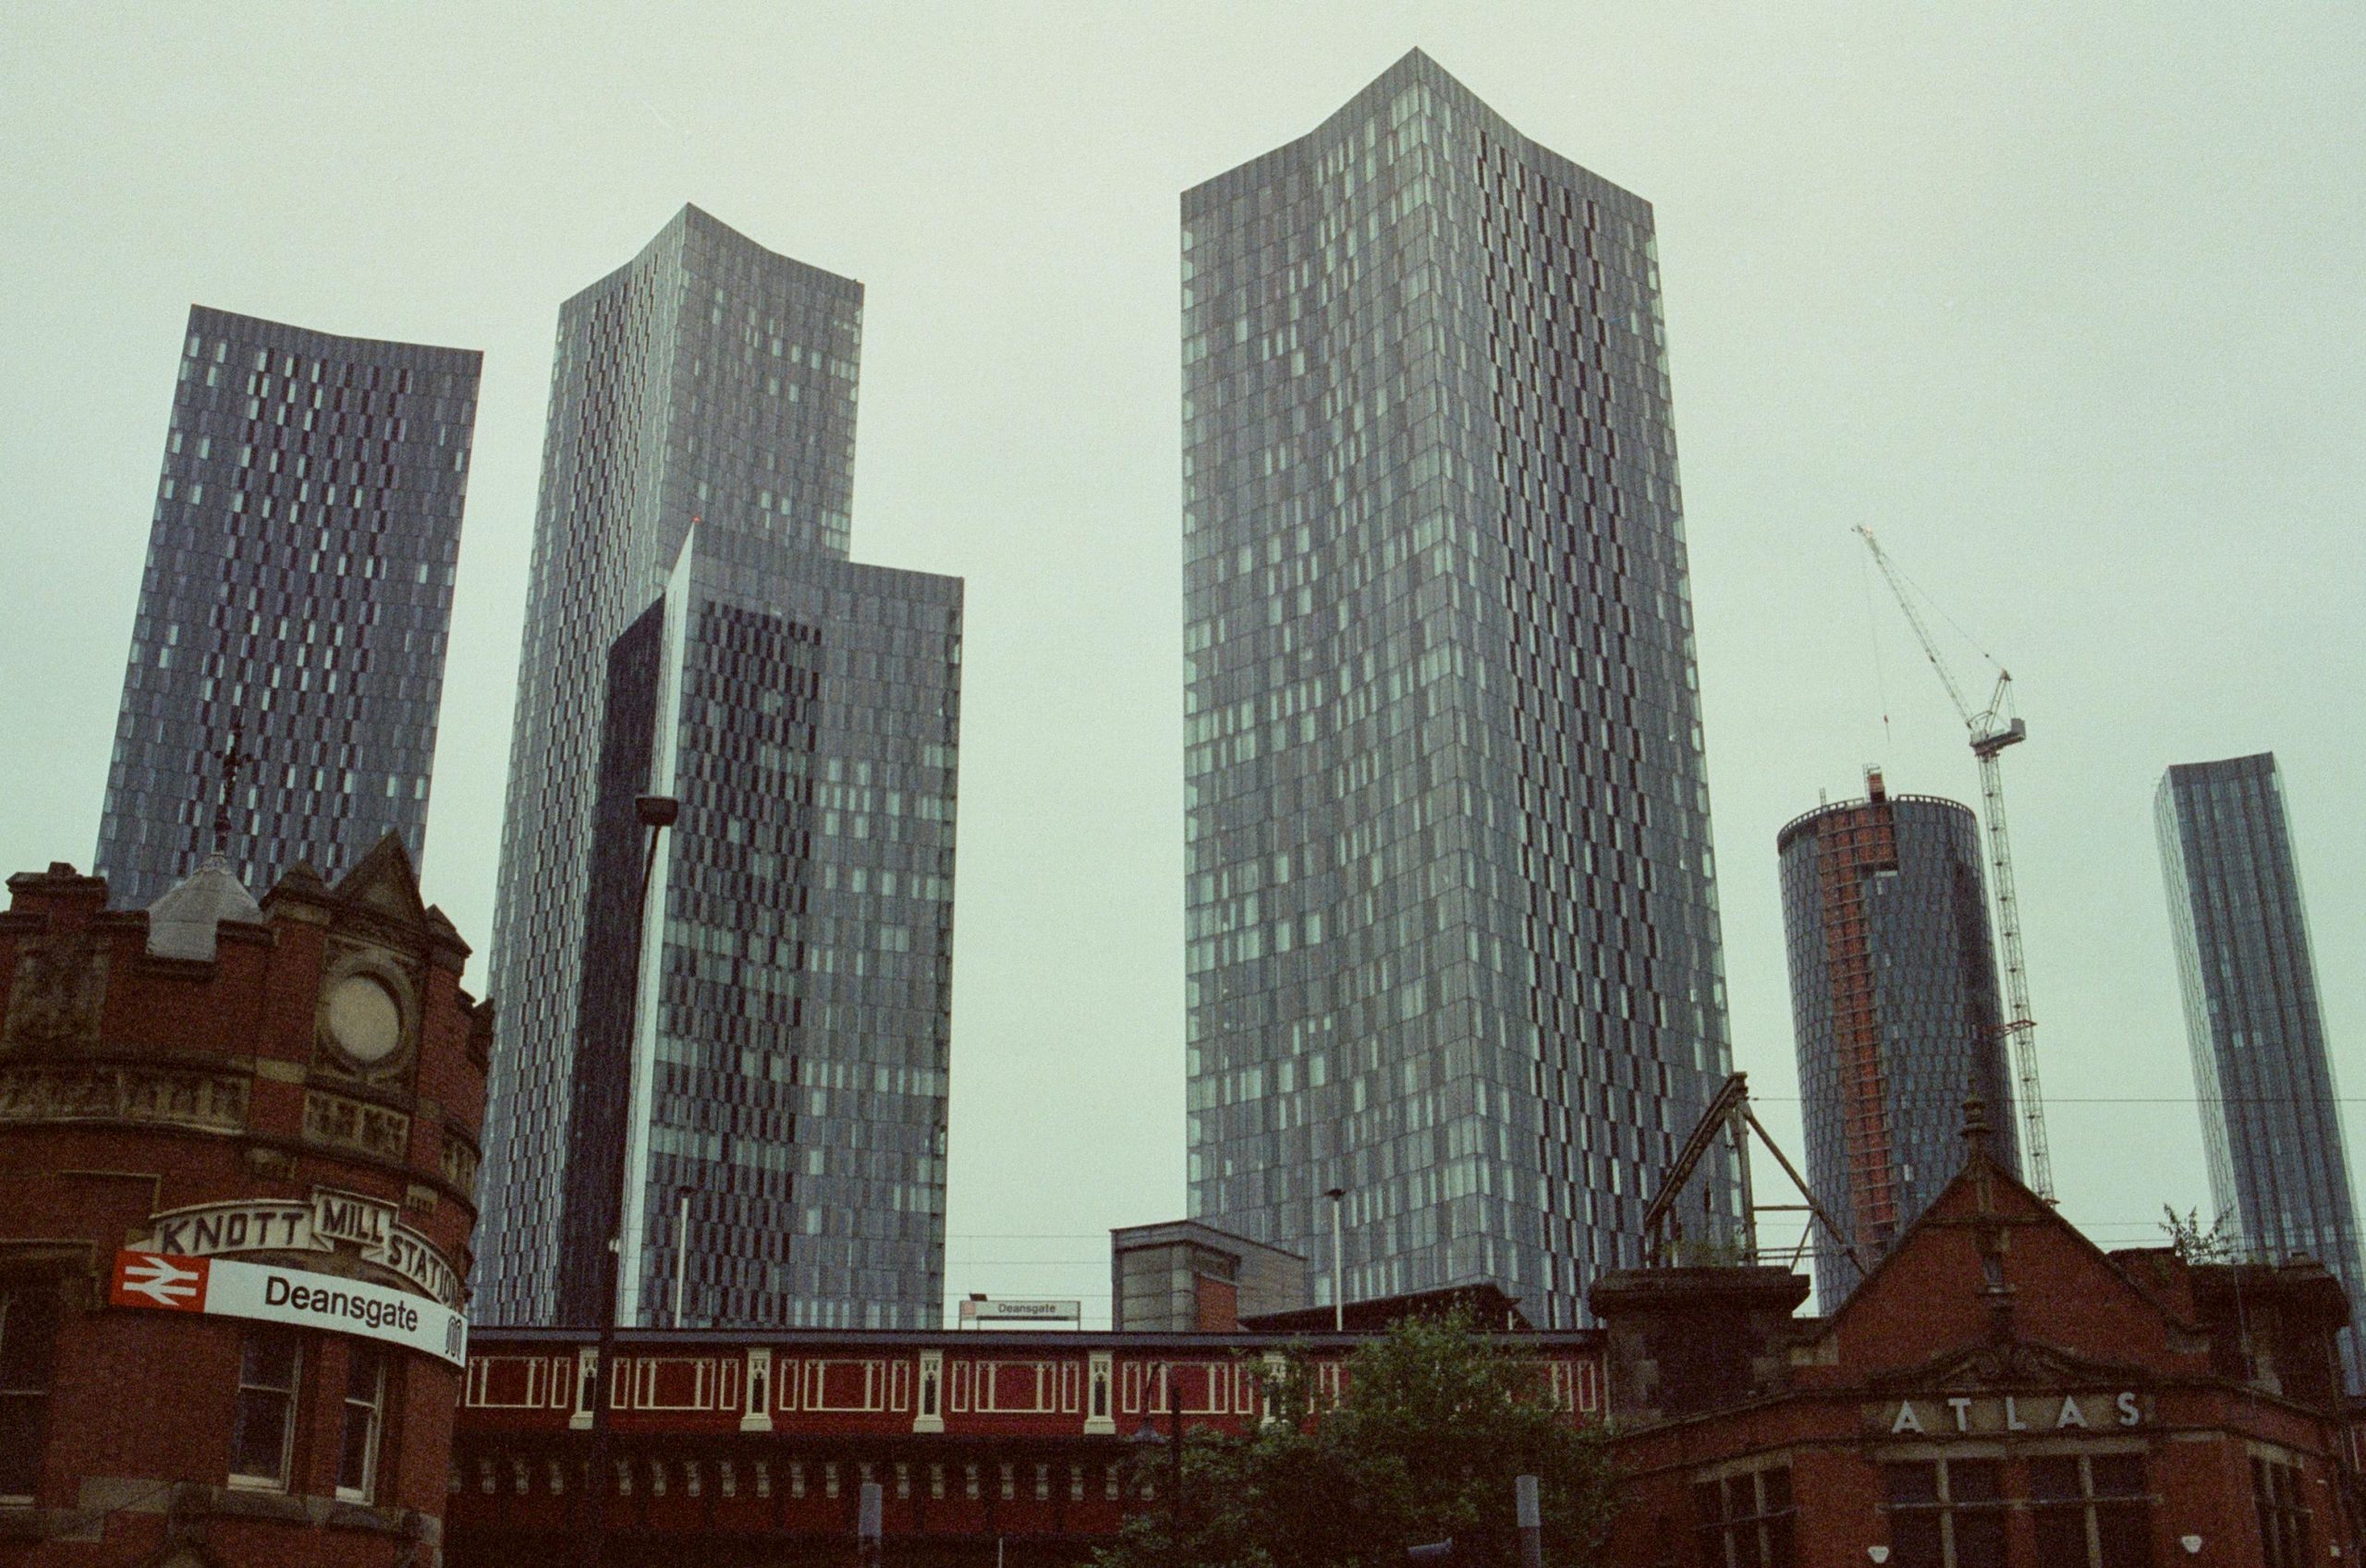 Deansgate Skyline during an overcast day